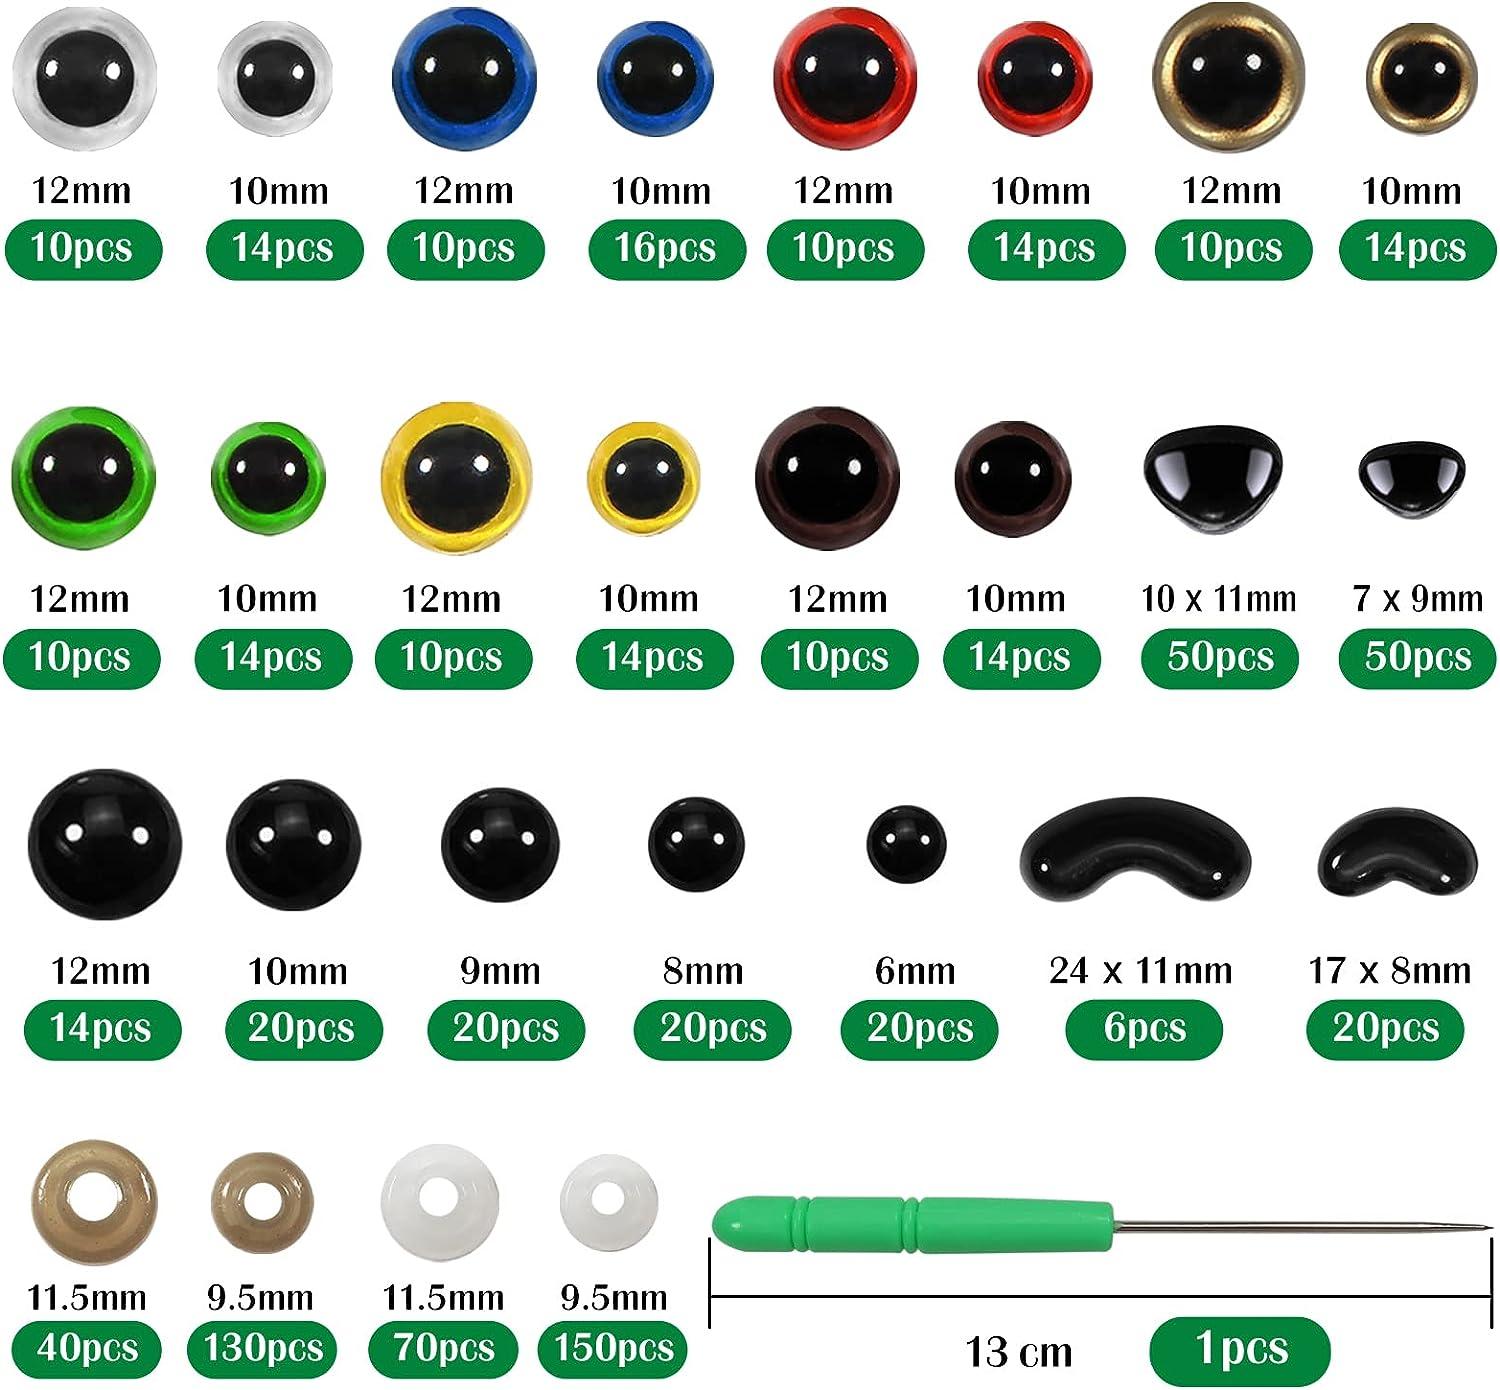 Plastic Safety Eyes and Noses for Crochet (10 Colors). Assorted